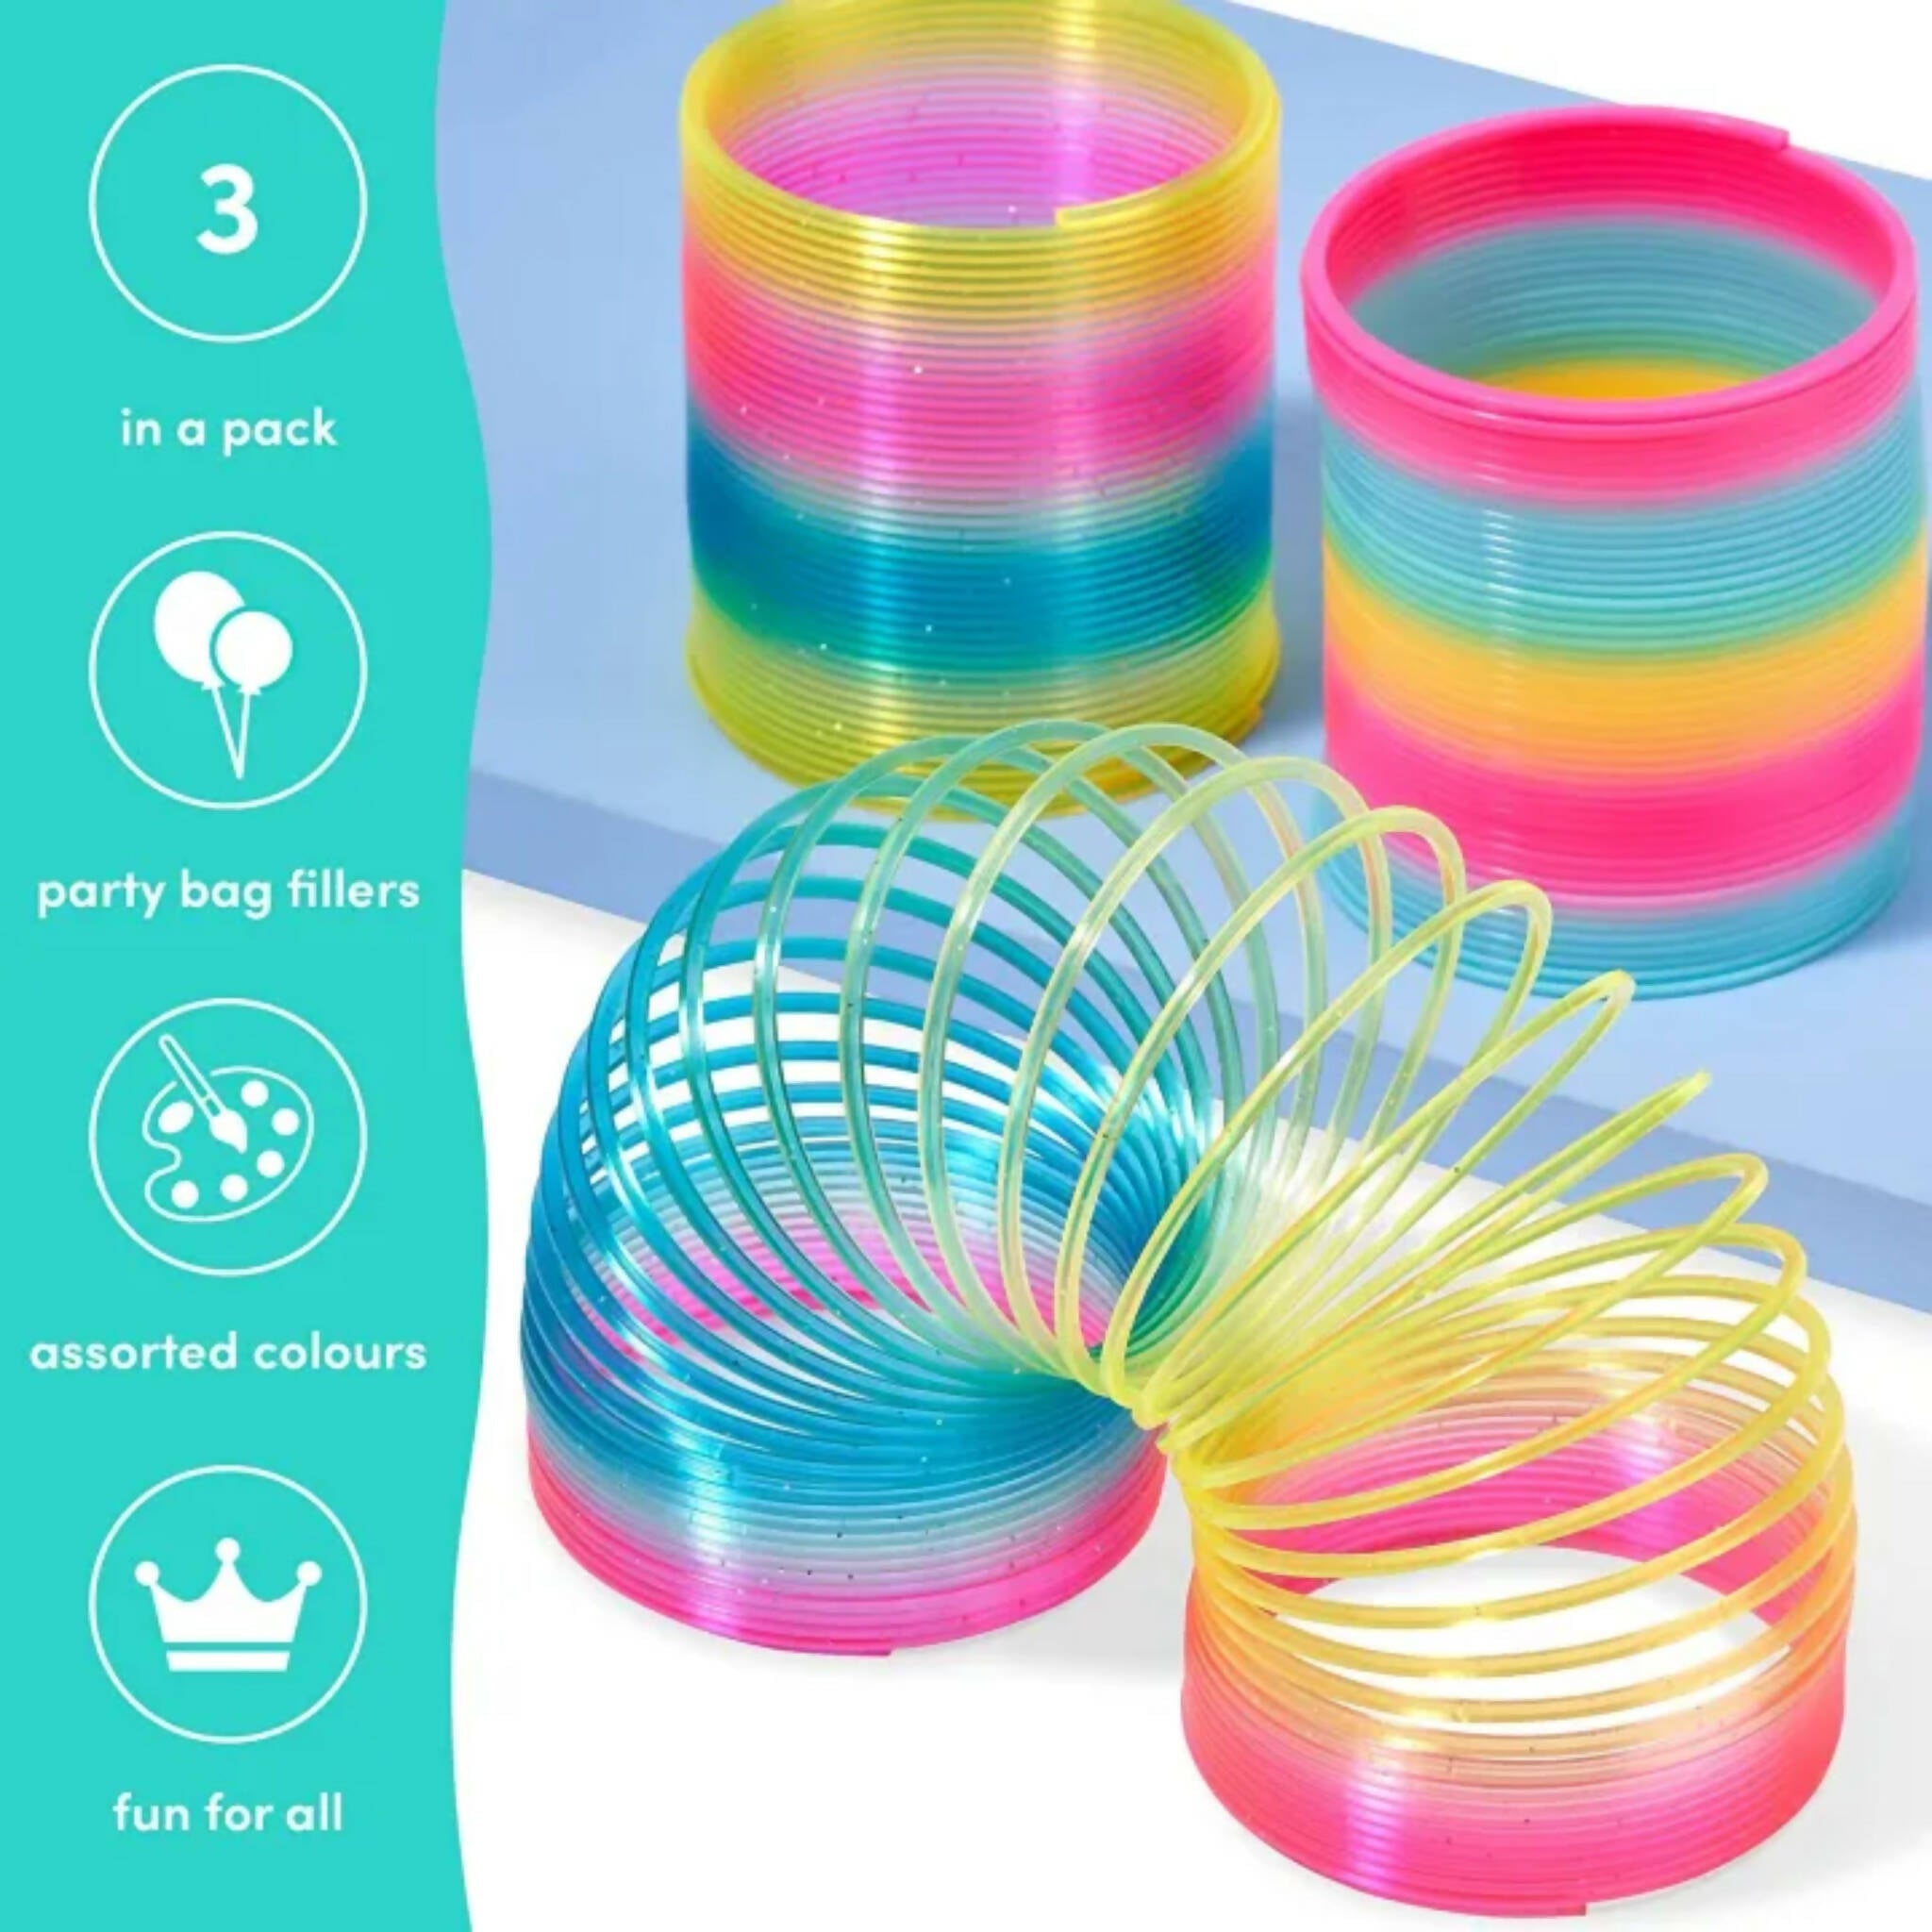 Colorful Rainbow Spring Toy, Endless Fun, for Kids'